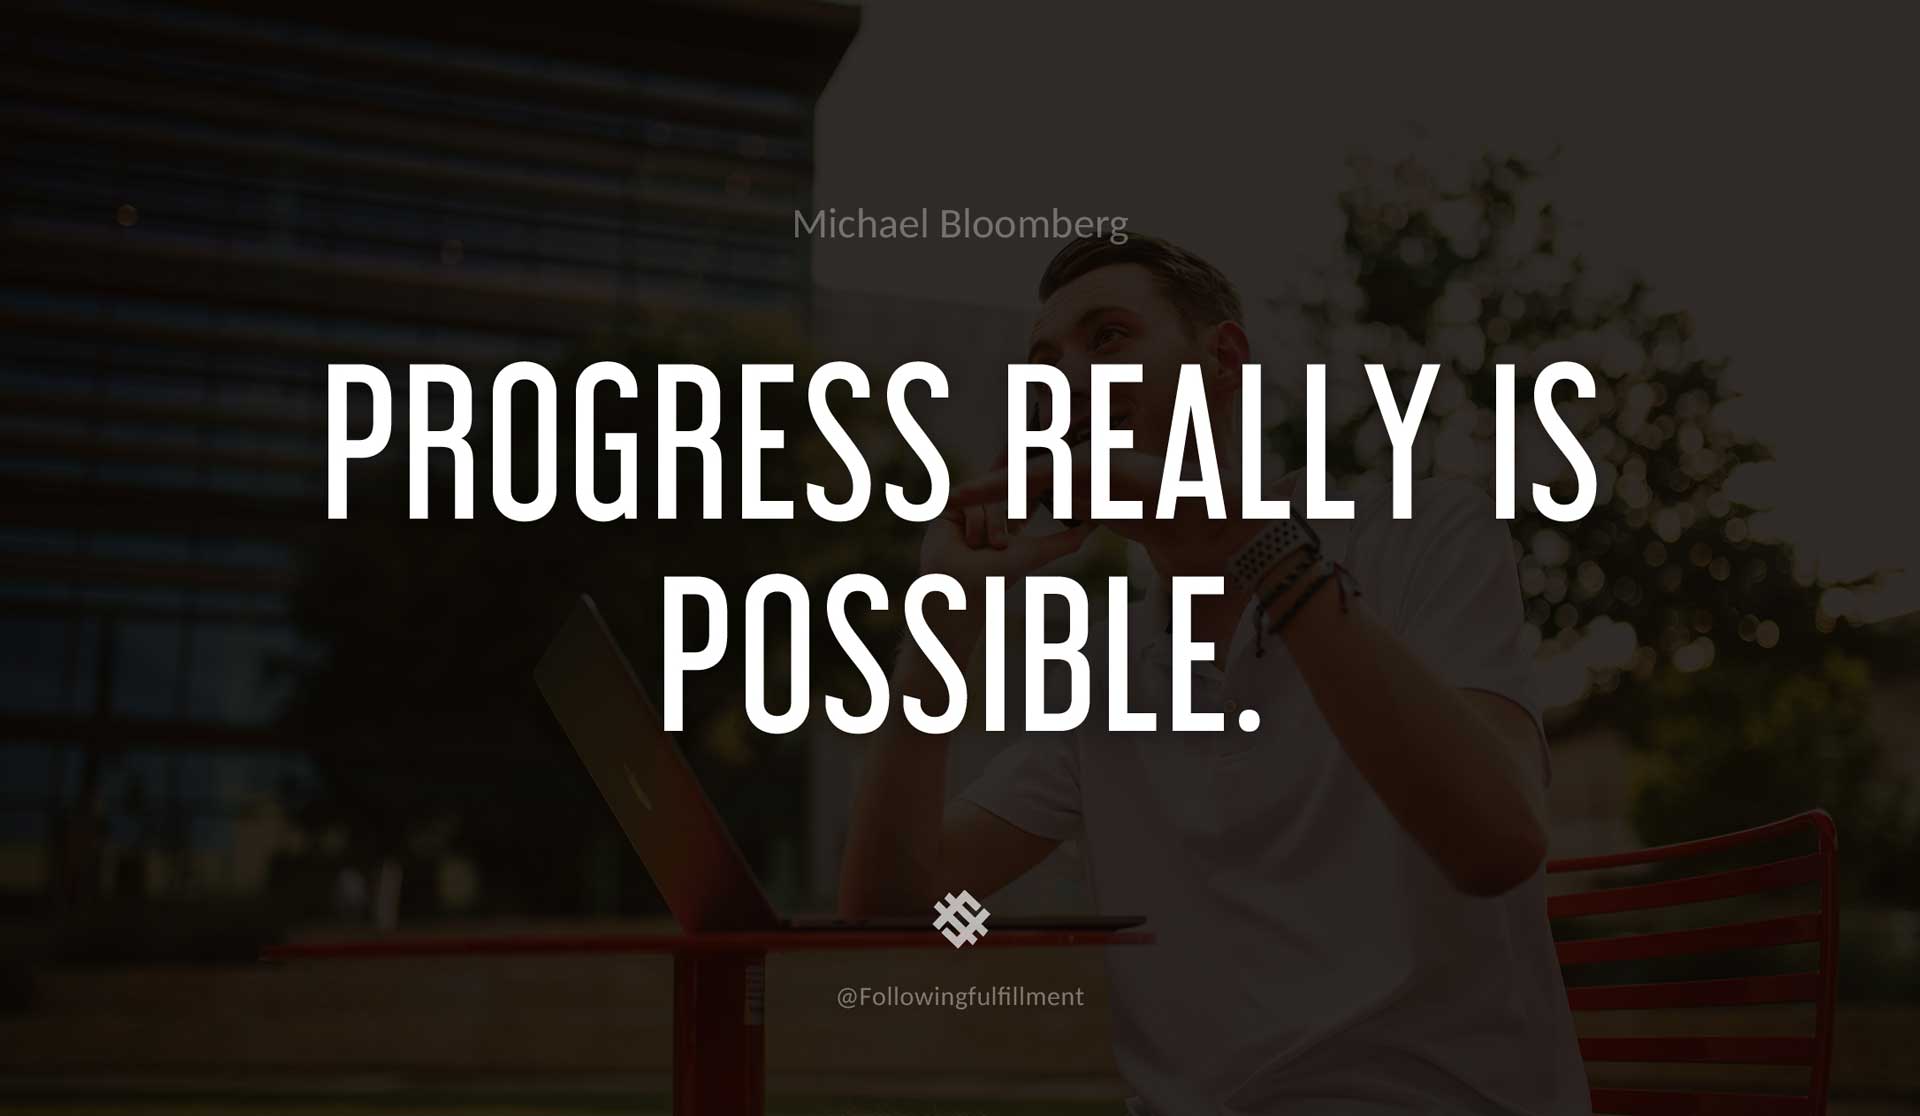 Progress-really-is-possible.-MICHAEL-BLOOMBERG-Quote.jpg